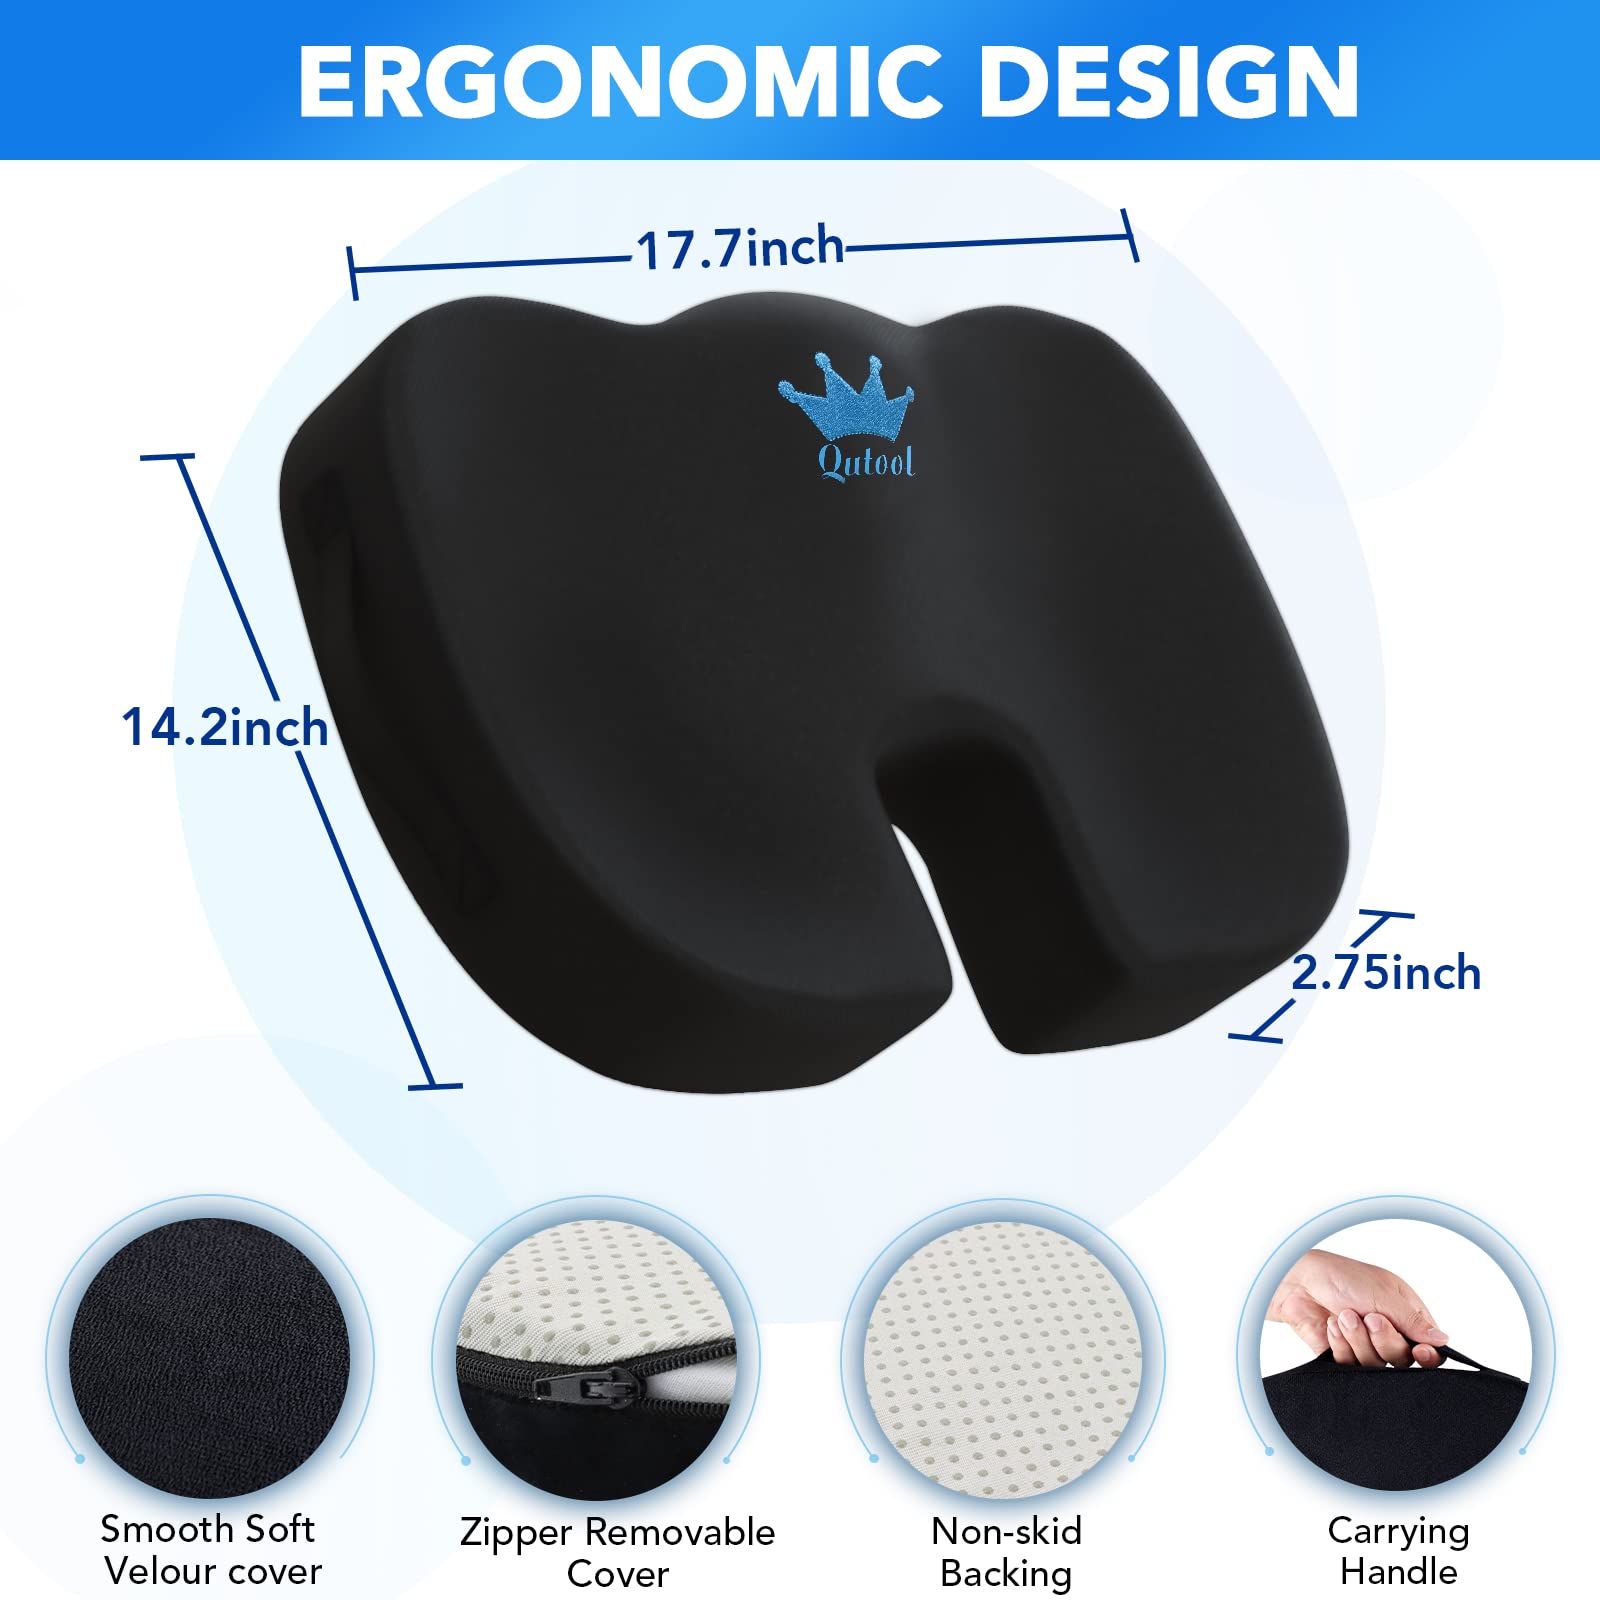 Gel Seat Cushion for Office Chair Coccyx Cushion for Tailbone Pain Relief - Memory Foam Car Seat Cushion for Back Chair Cushion for Desk Chair, Wheelchair, Computer Sciatica Pillow for Sitting